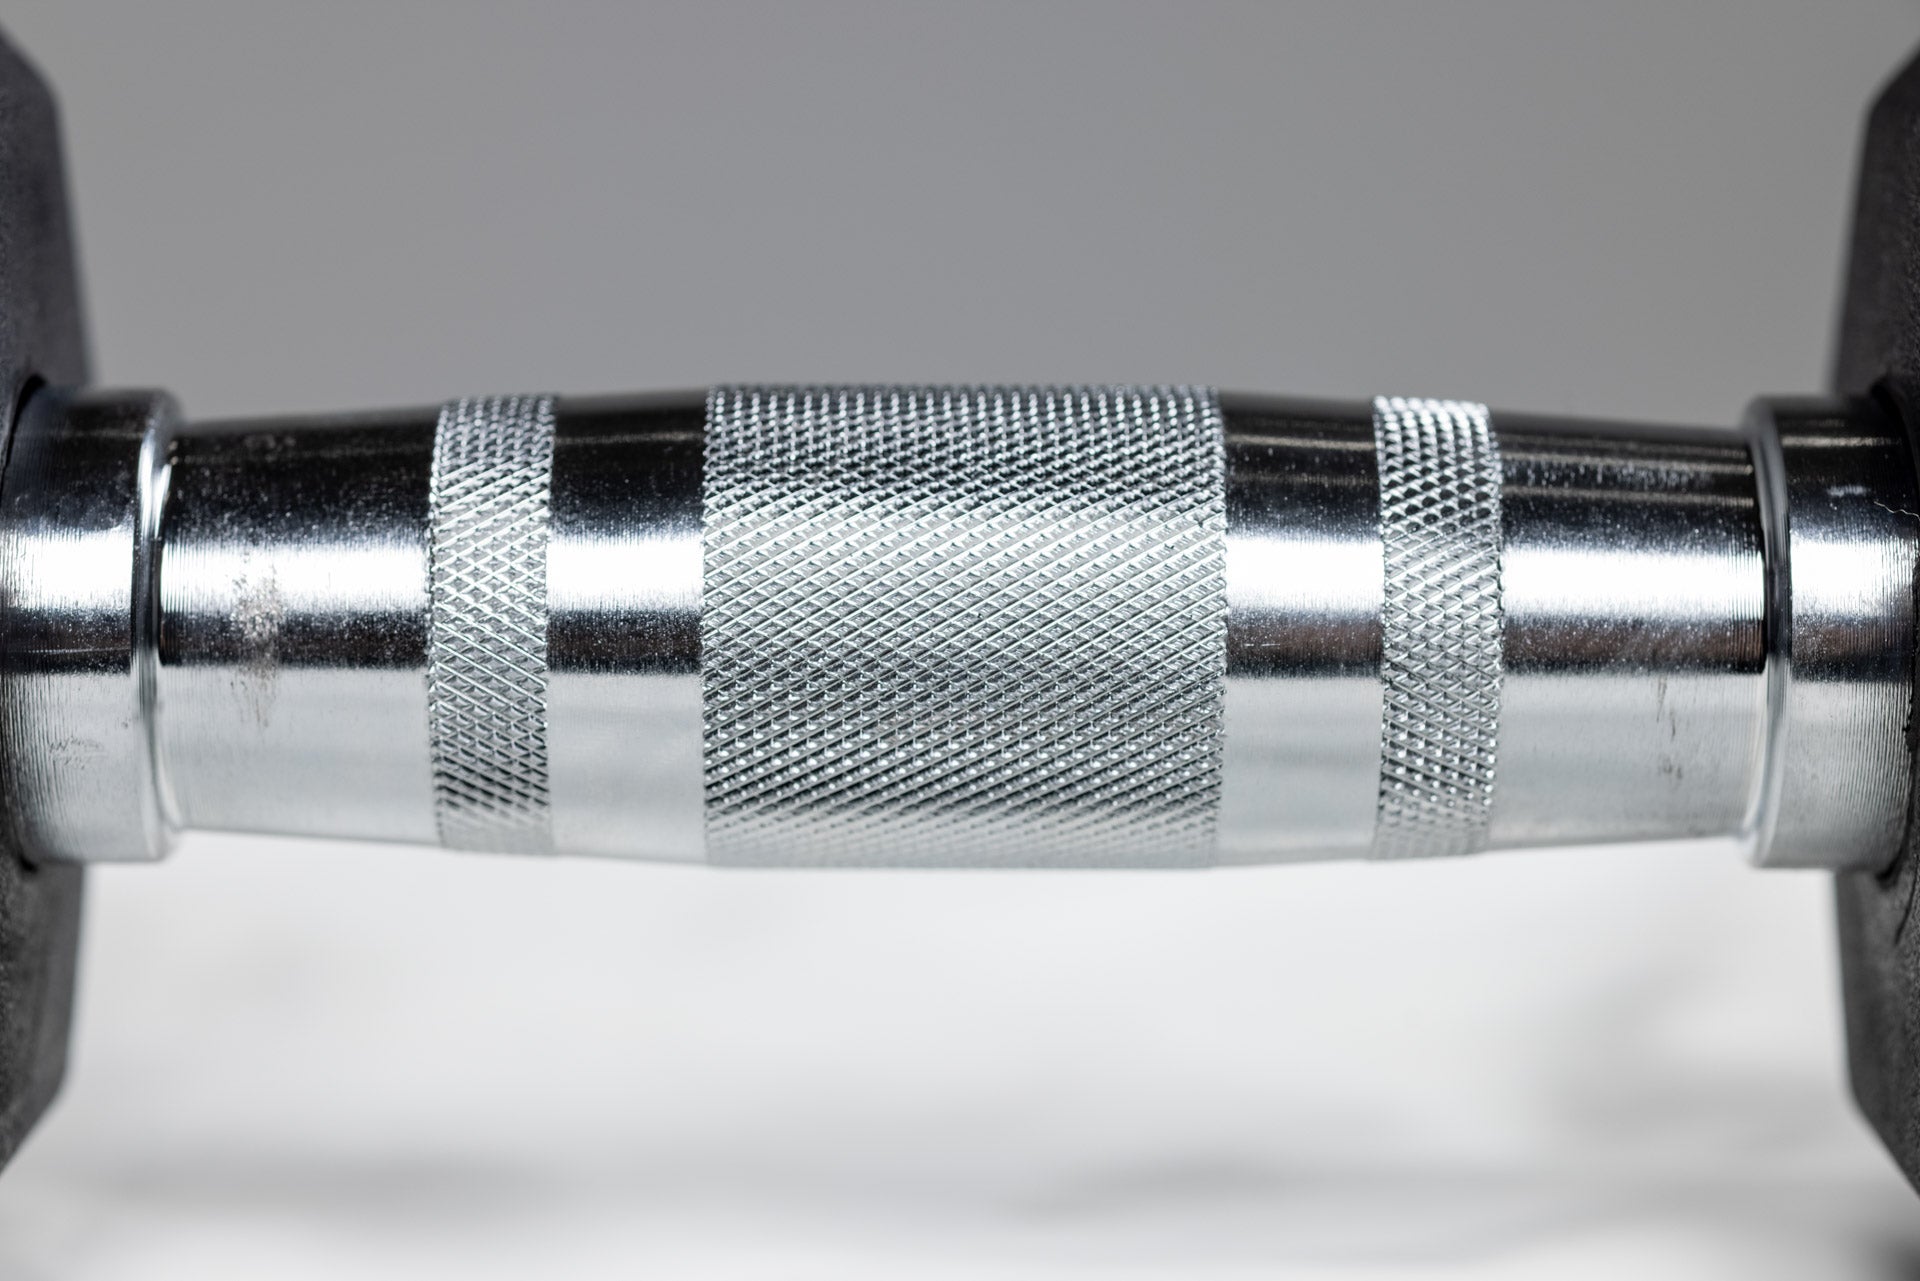 Close-up view of the knurled ergonomic handle of a REP Ergo Hex Dumbbell.